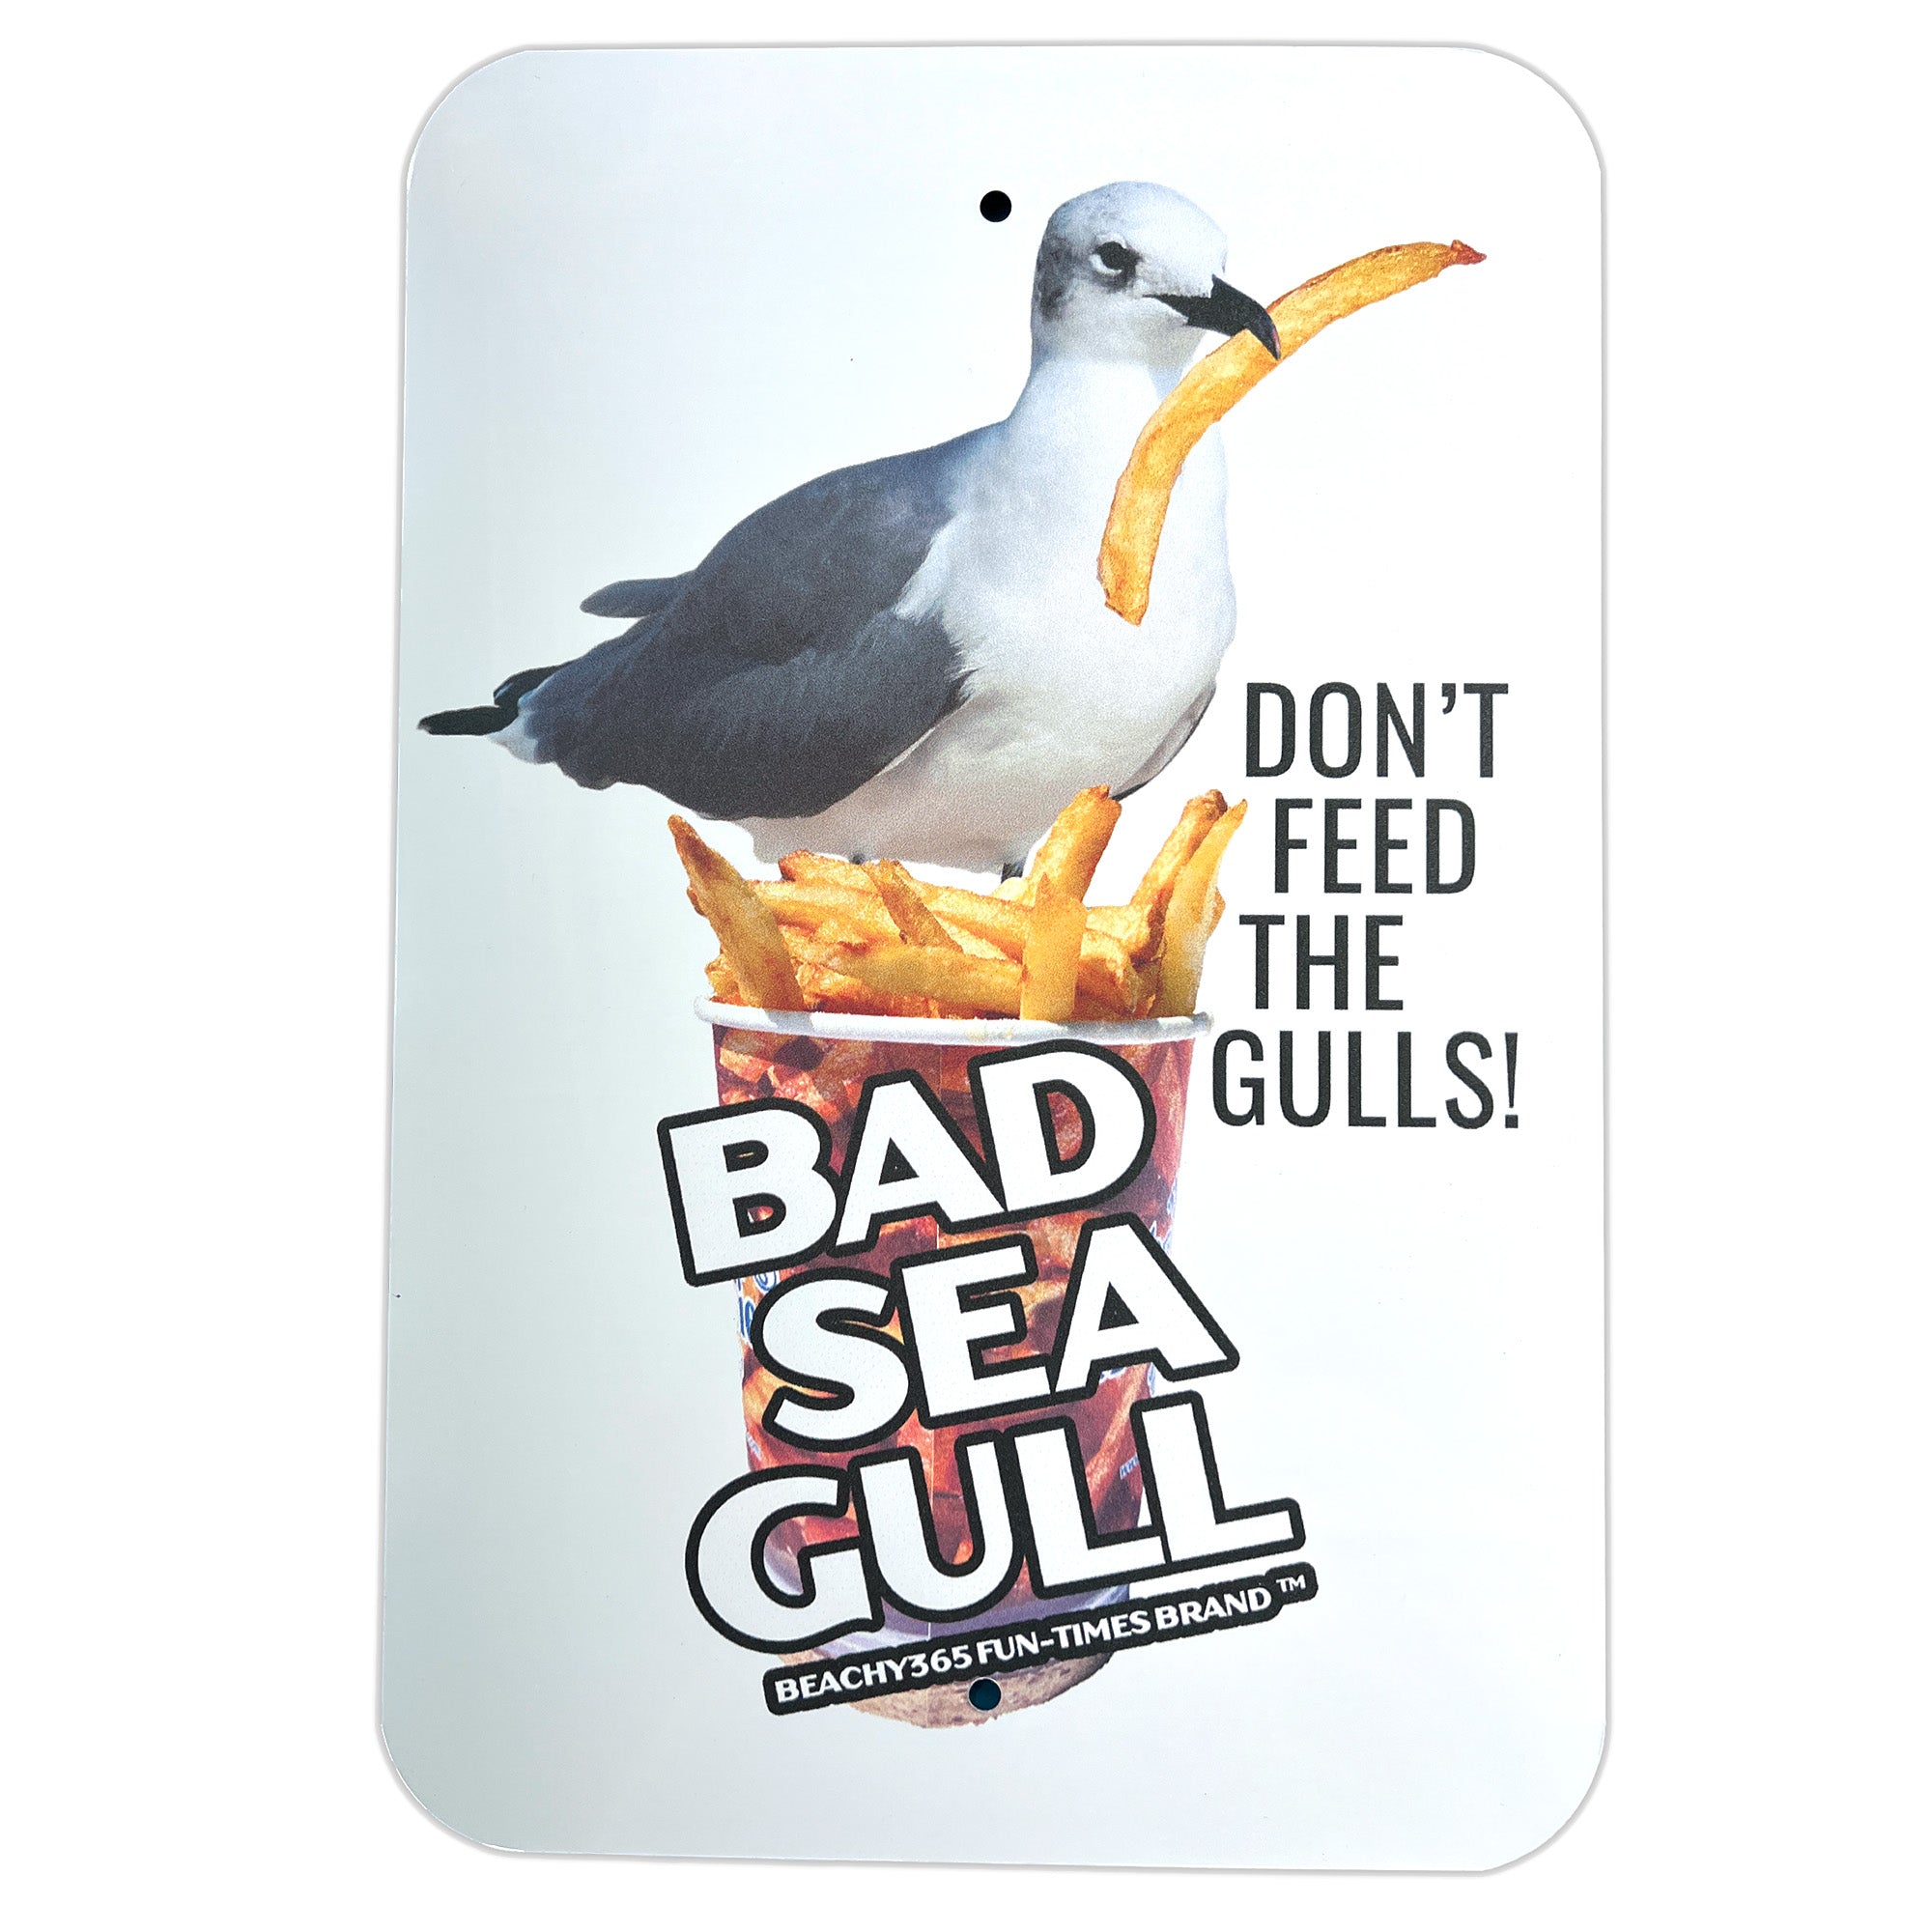 Bad Seagull - Don't Feed the Gulls 18" x 12" Aluminum Sign